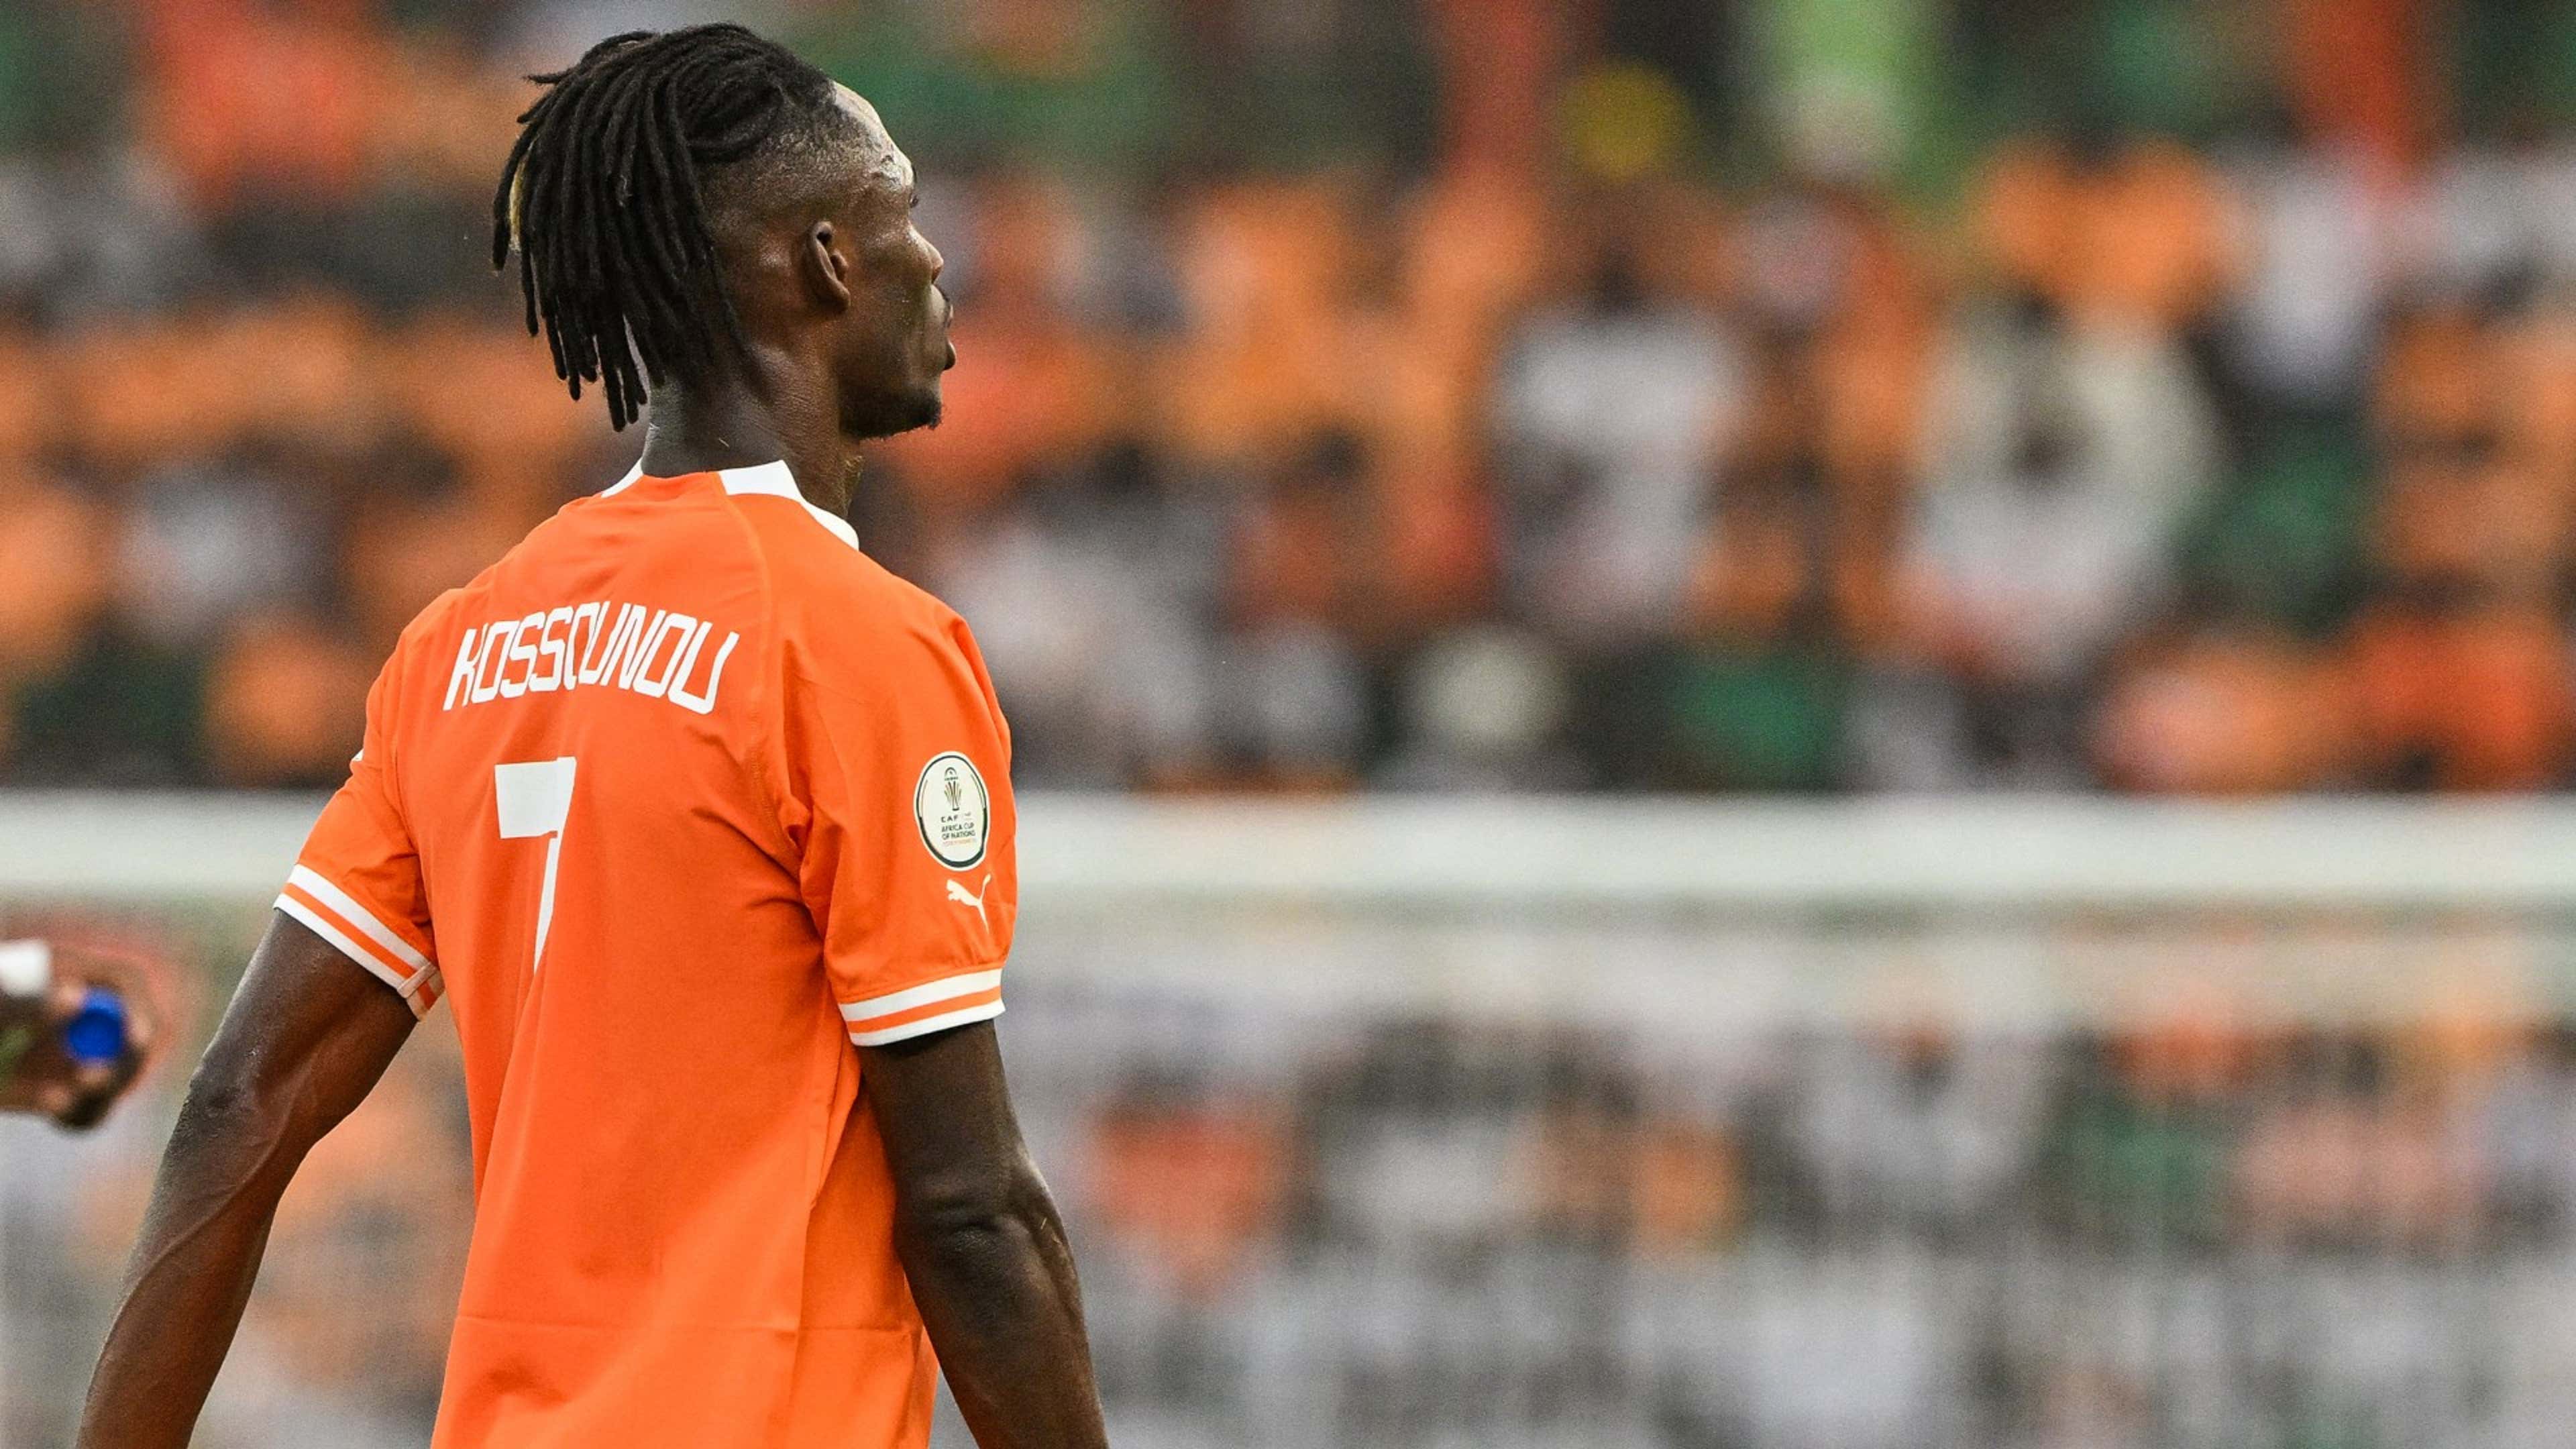 Huge extra-time drama as nine-man Ivory Coast miraculously book Africa Cup  of Nations semi-final place after Brighton's Simon Adingra & Oumar Diakite  break Mali hearts